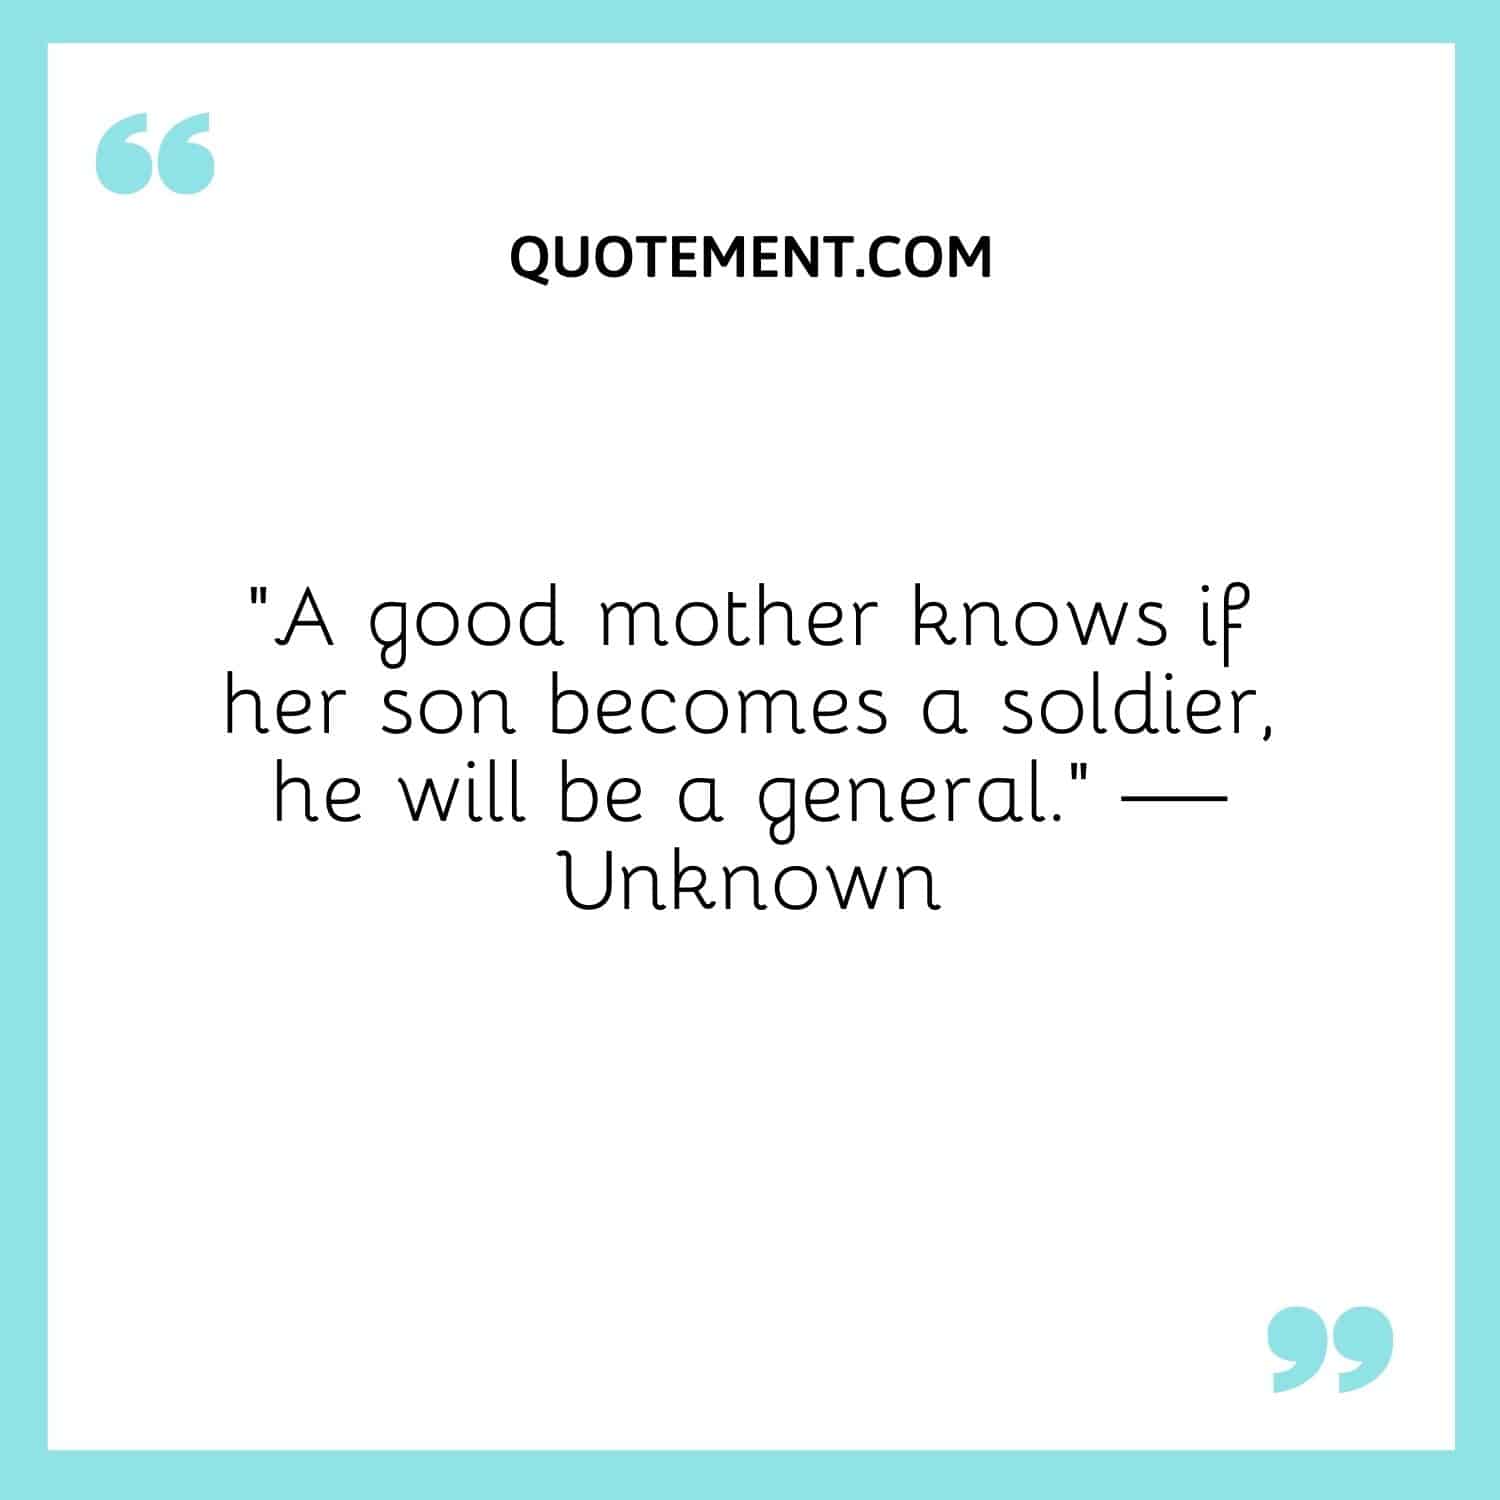 A good mother knows if her son becomes a soldier, he will be a general.